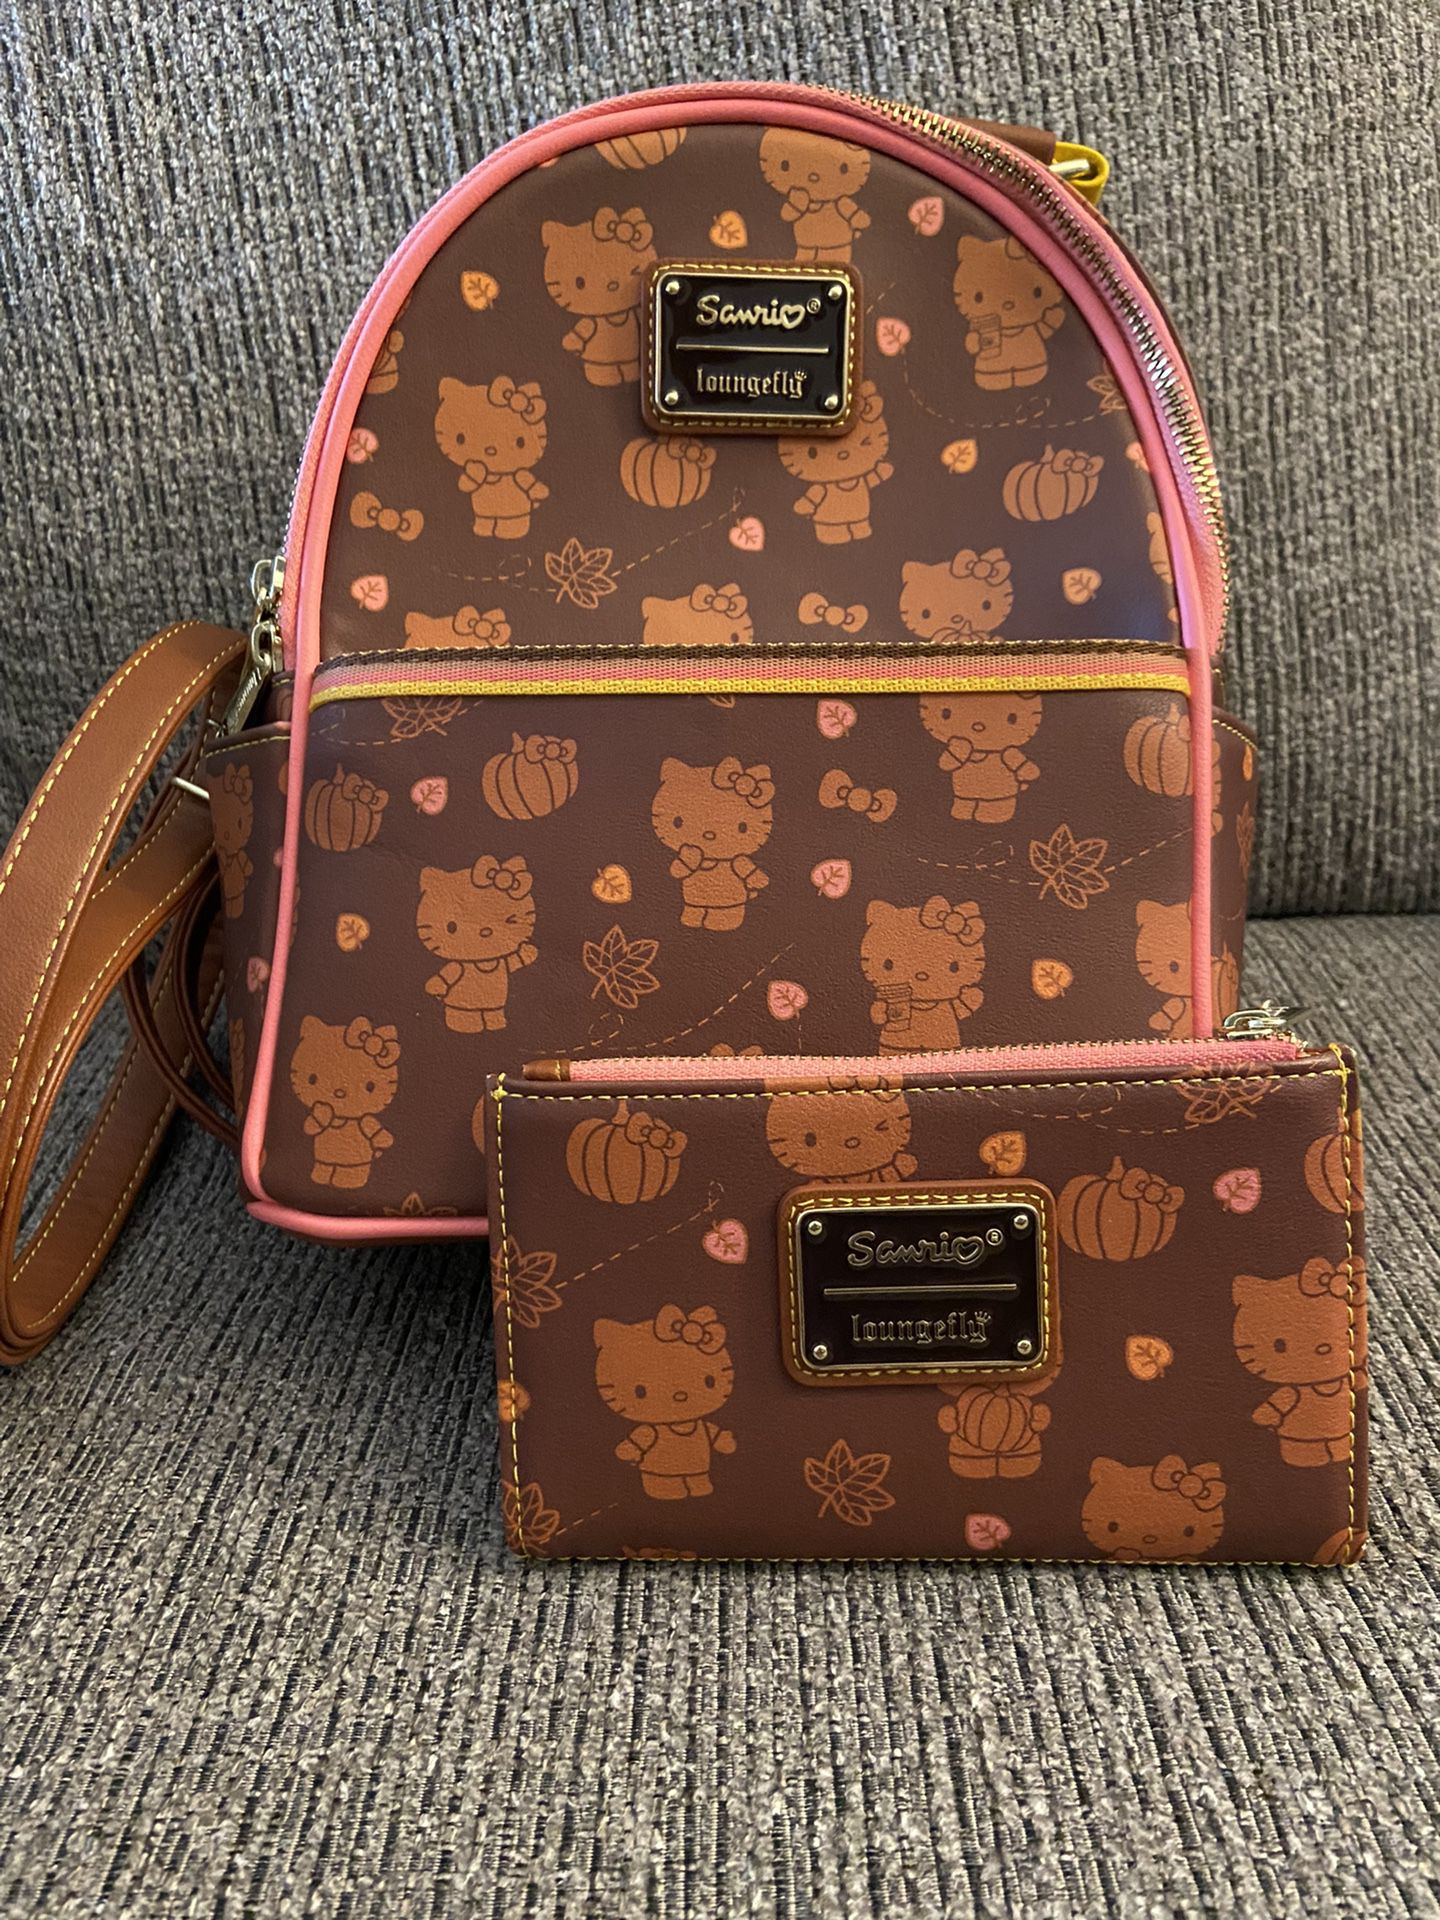 hello kitty loungefly backpack purse / wallet for Sale in Las Vegas